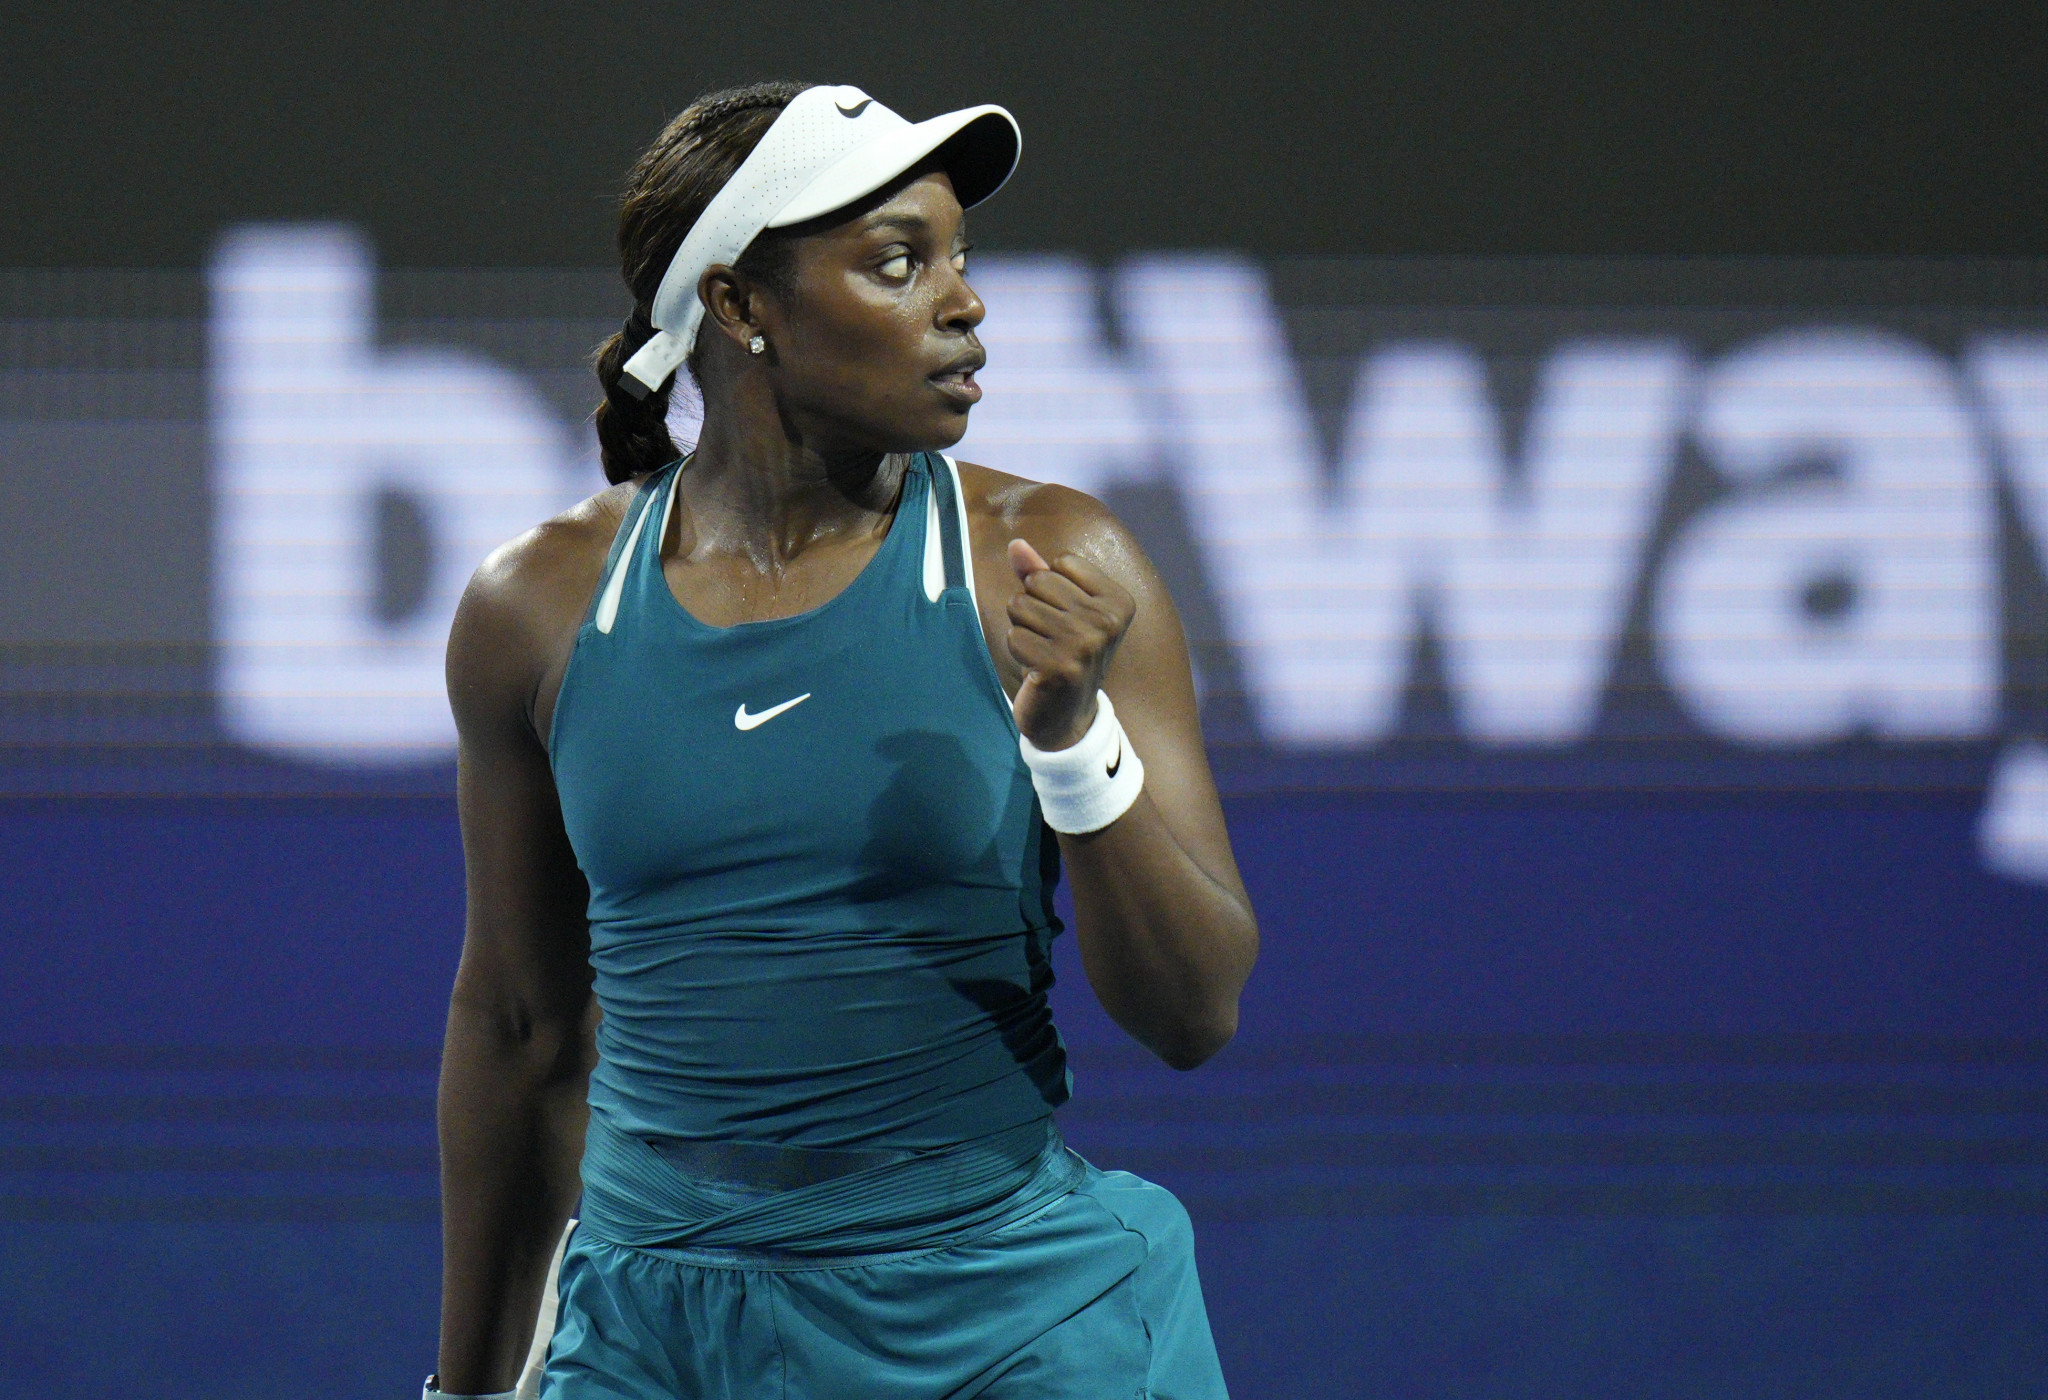 Former Miami Open champion Sloane Stephens got her campaign off to a winning start ©Getty Images